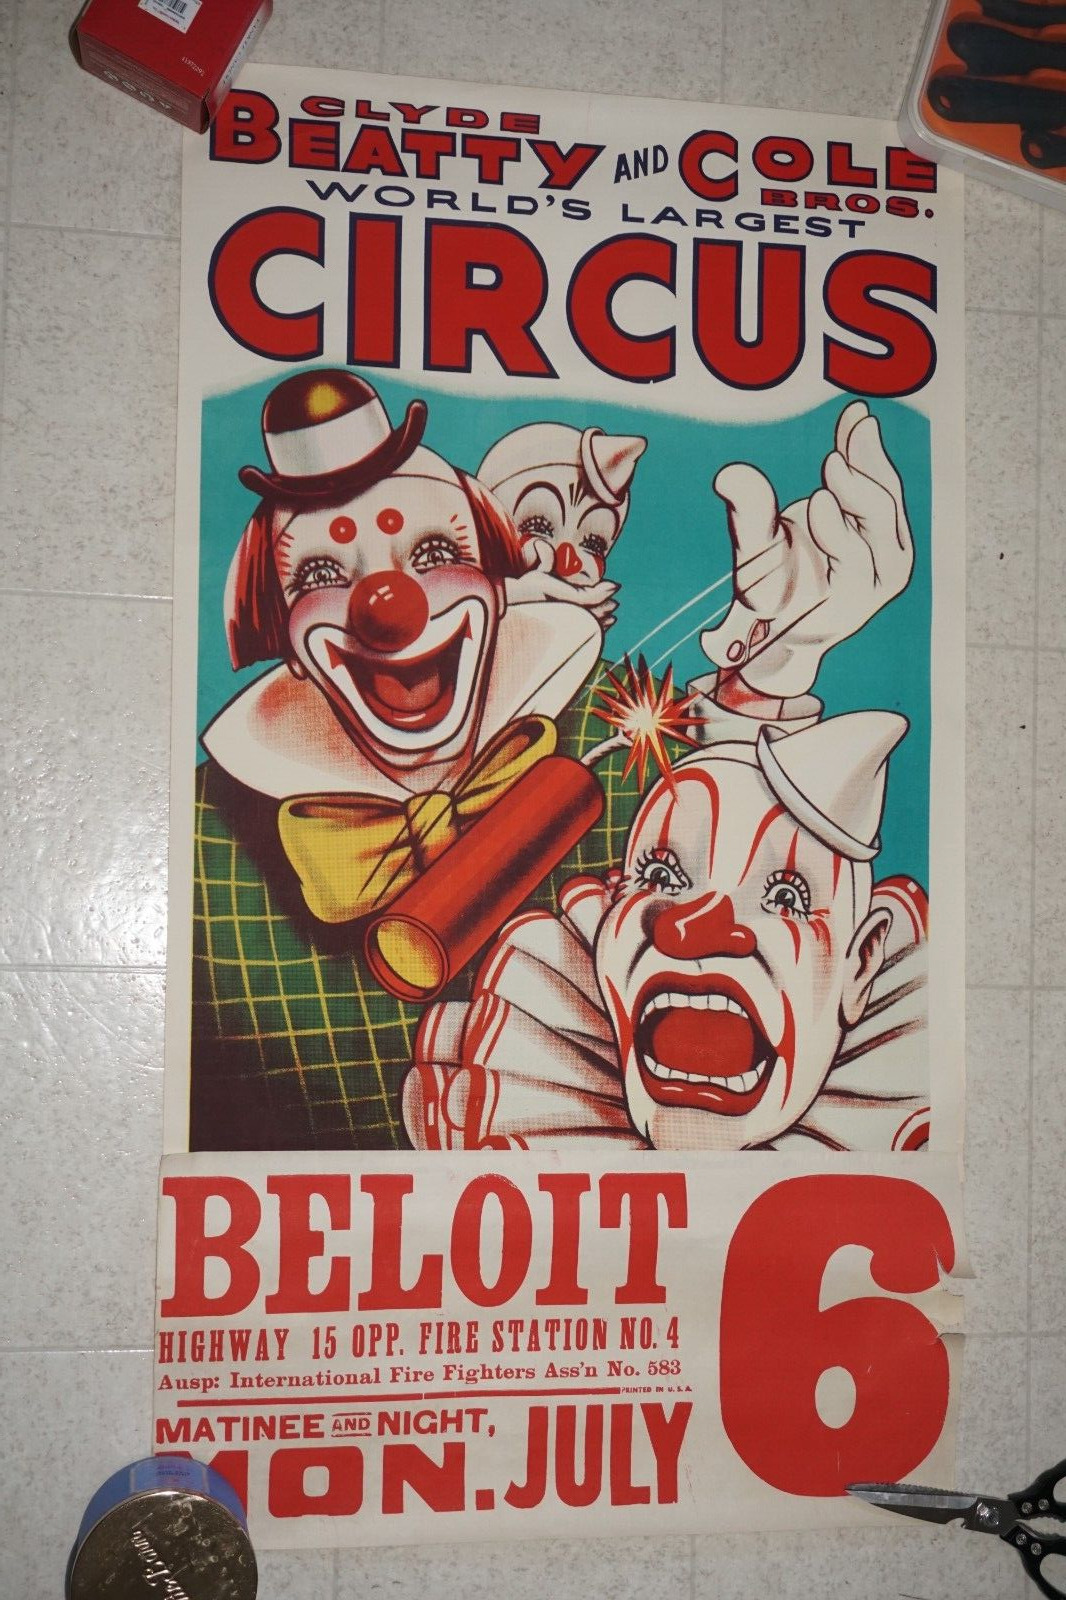 CLYDE BEATTY COLE BROS CIRCUS 37X20 CIRCUS POSTER 1960S ART CLOWN PULLING Prank